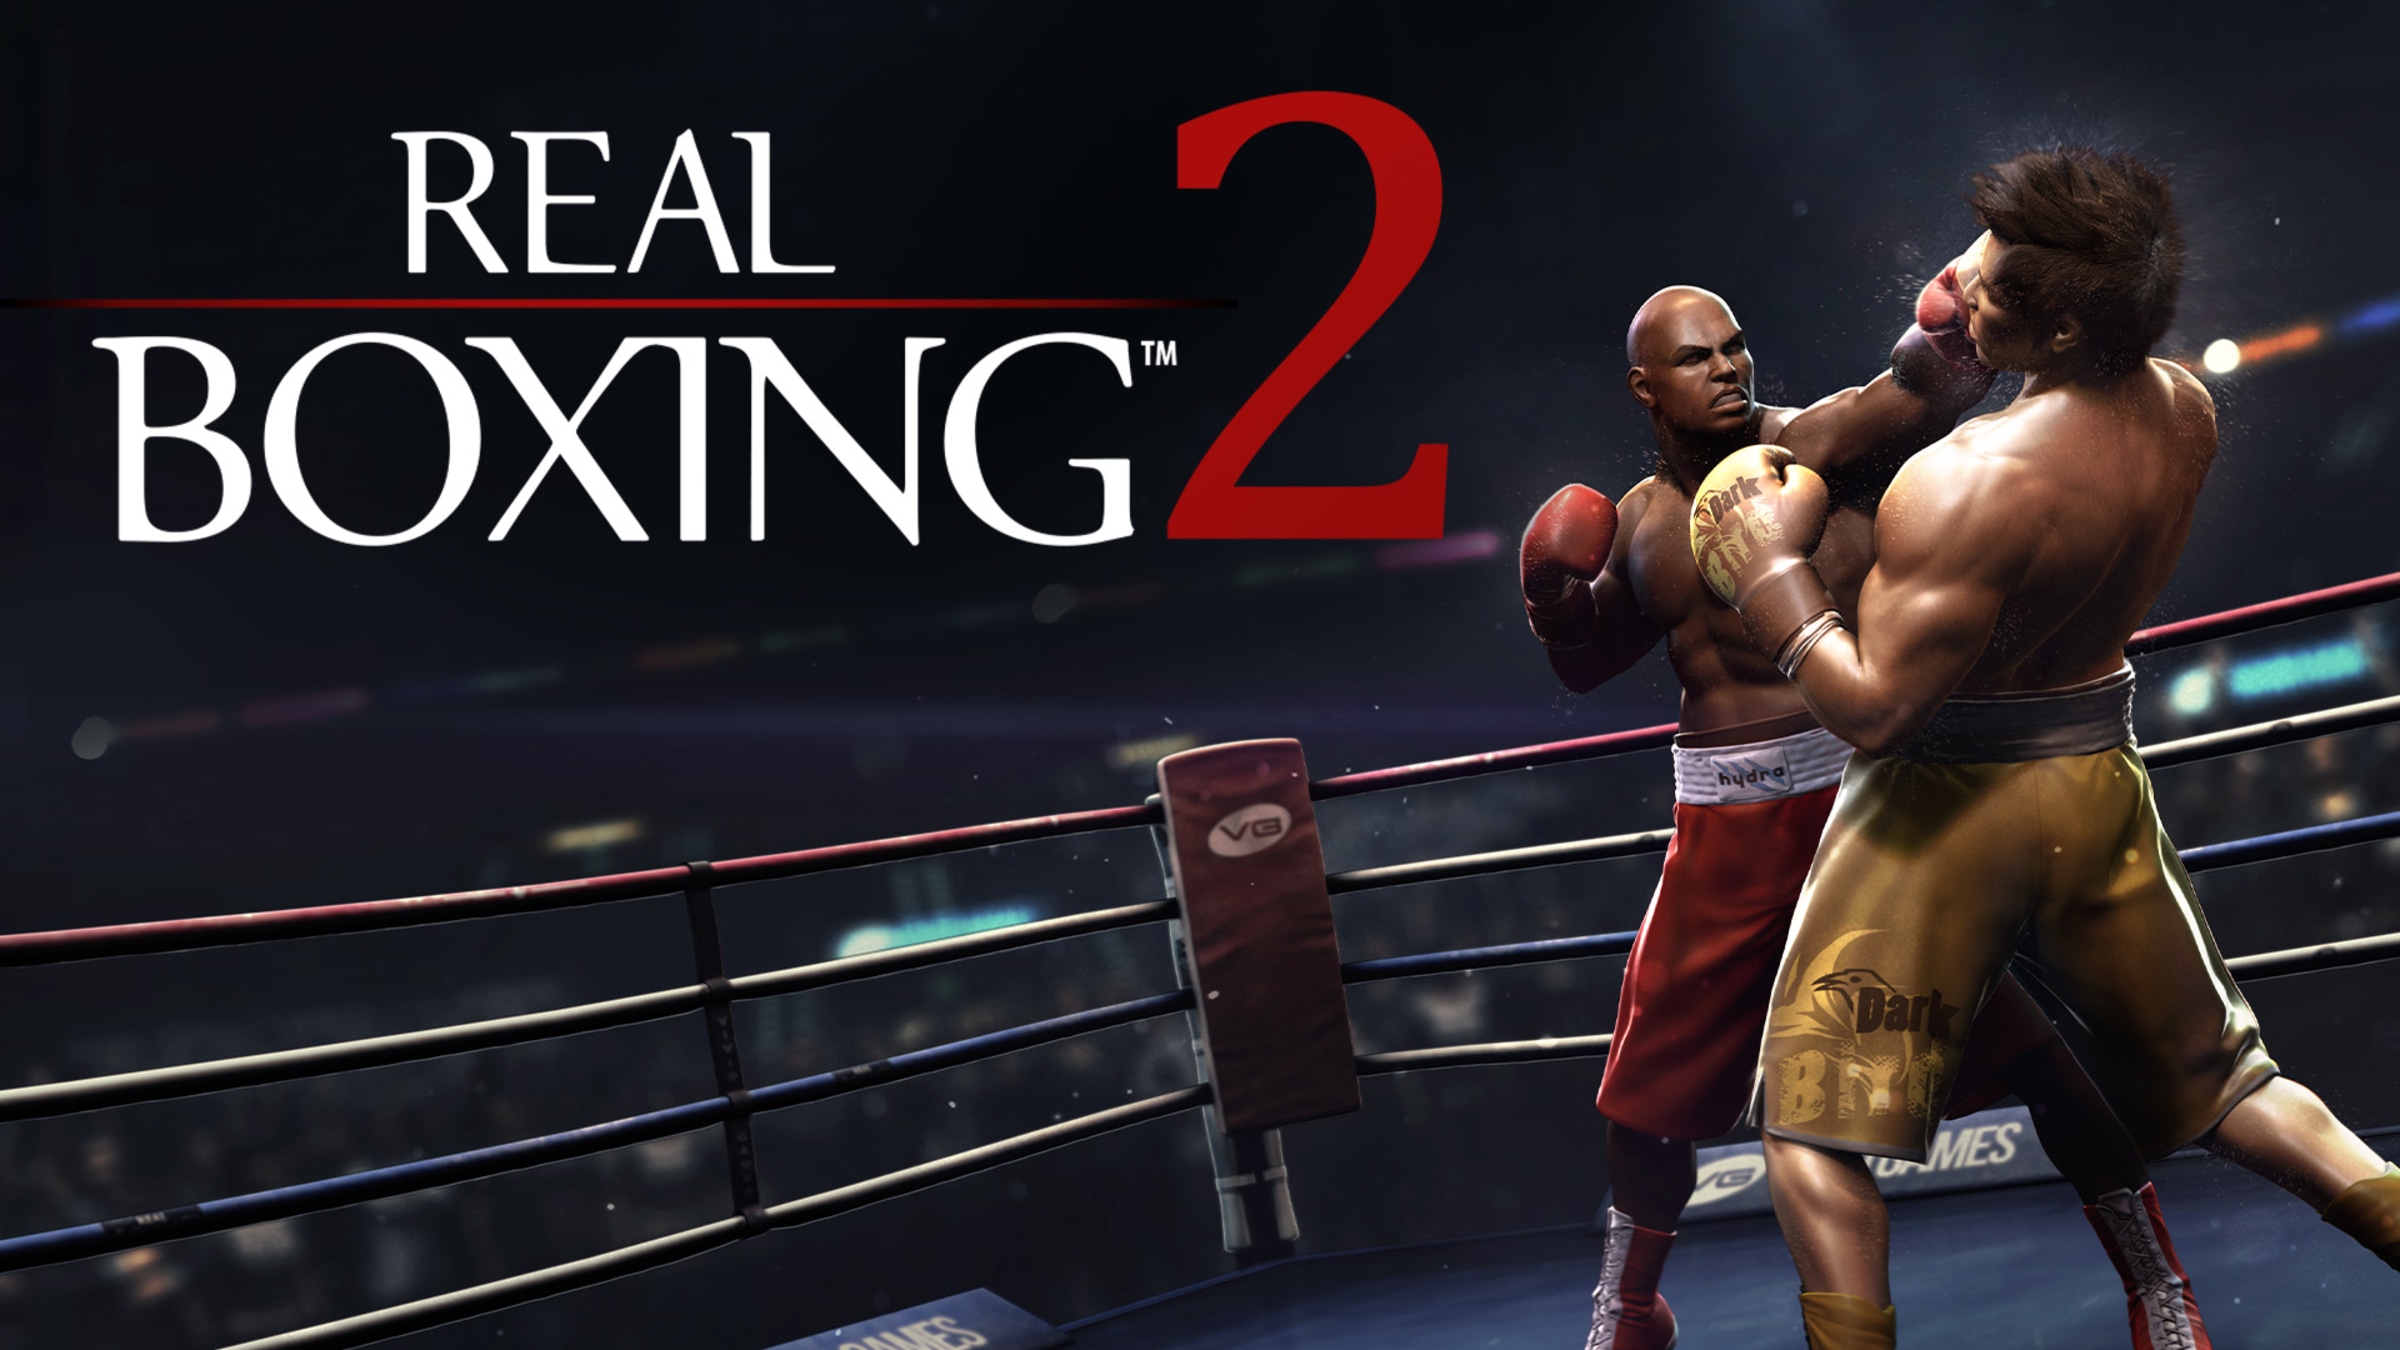 Real Boxing 2 For Nintendo Switch - Nintendo Official Site